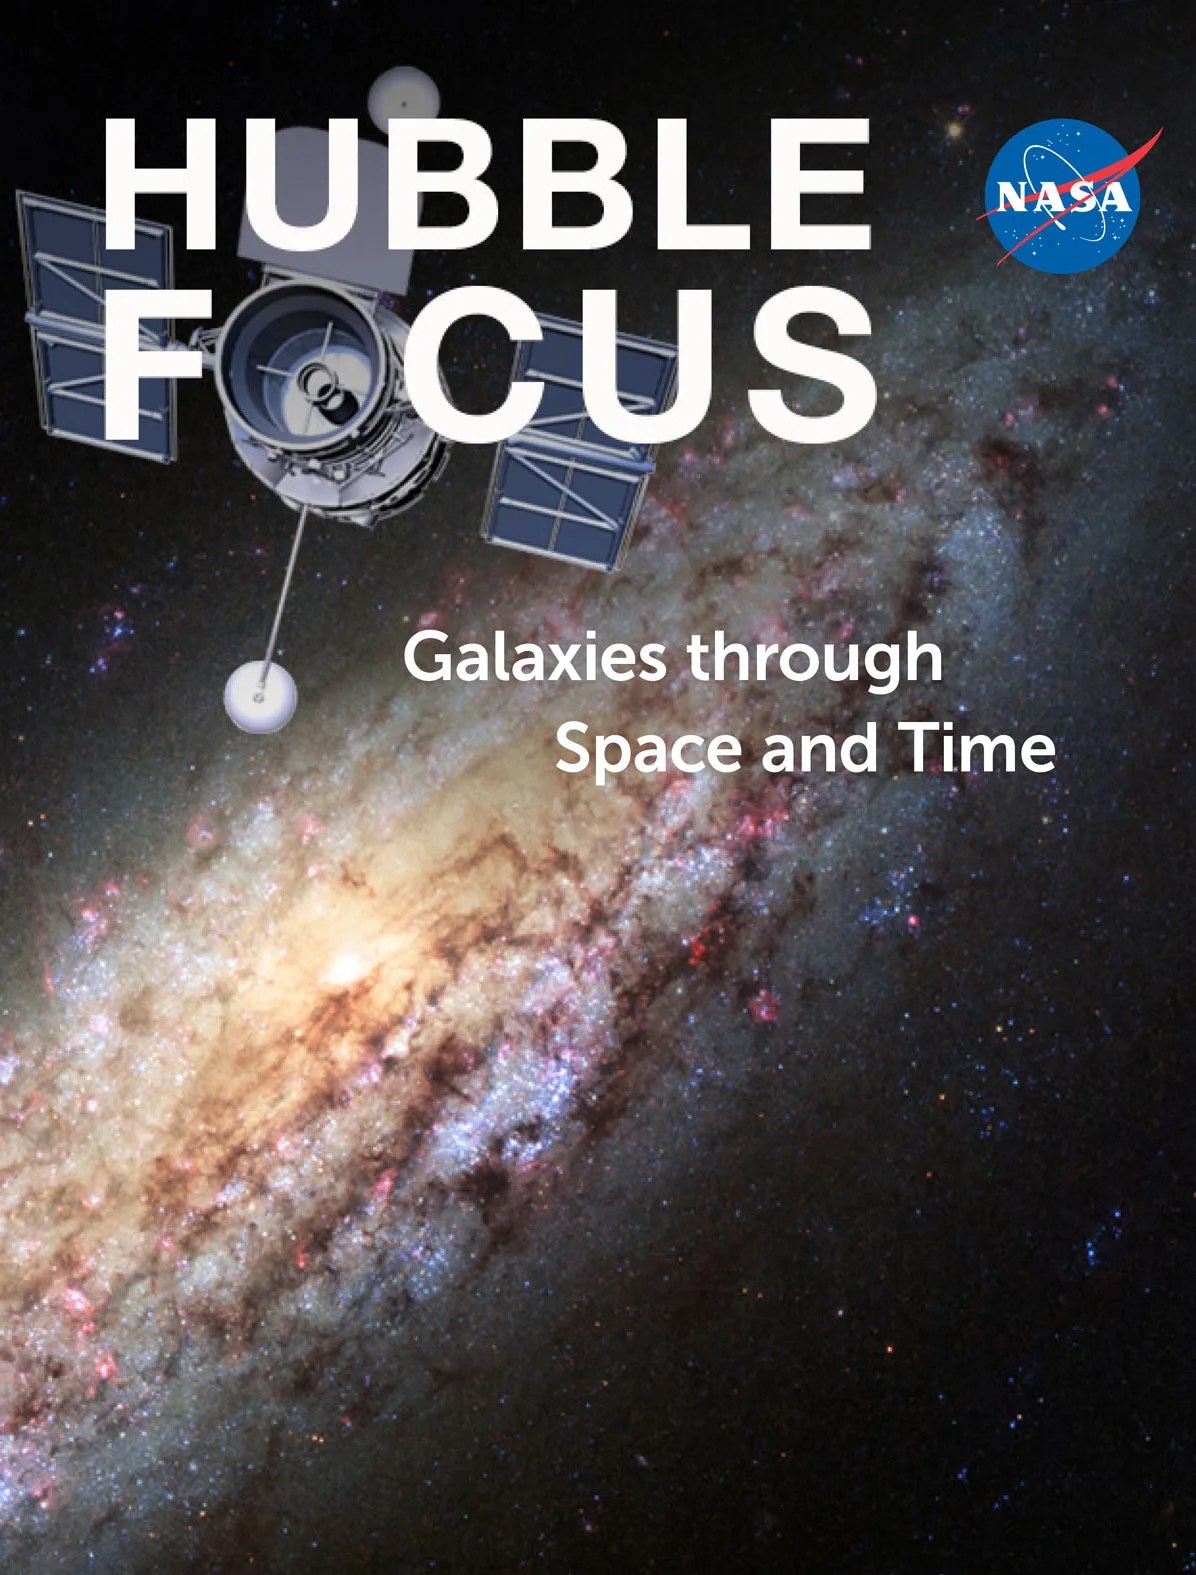 Hubble focus ebook with galaxy image on cover